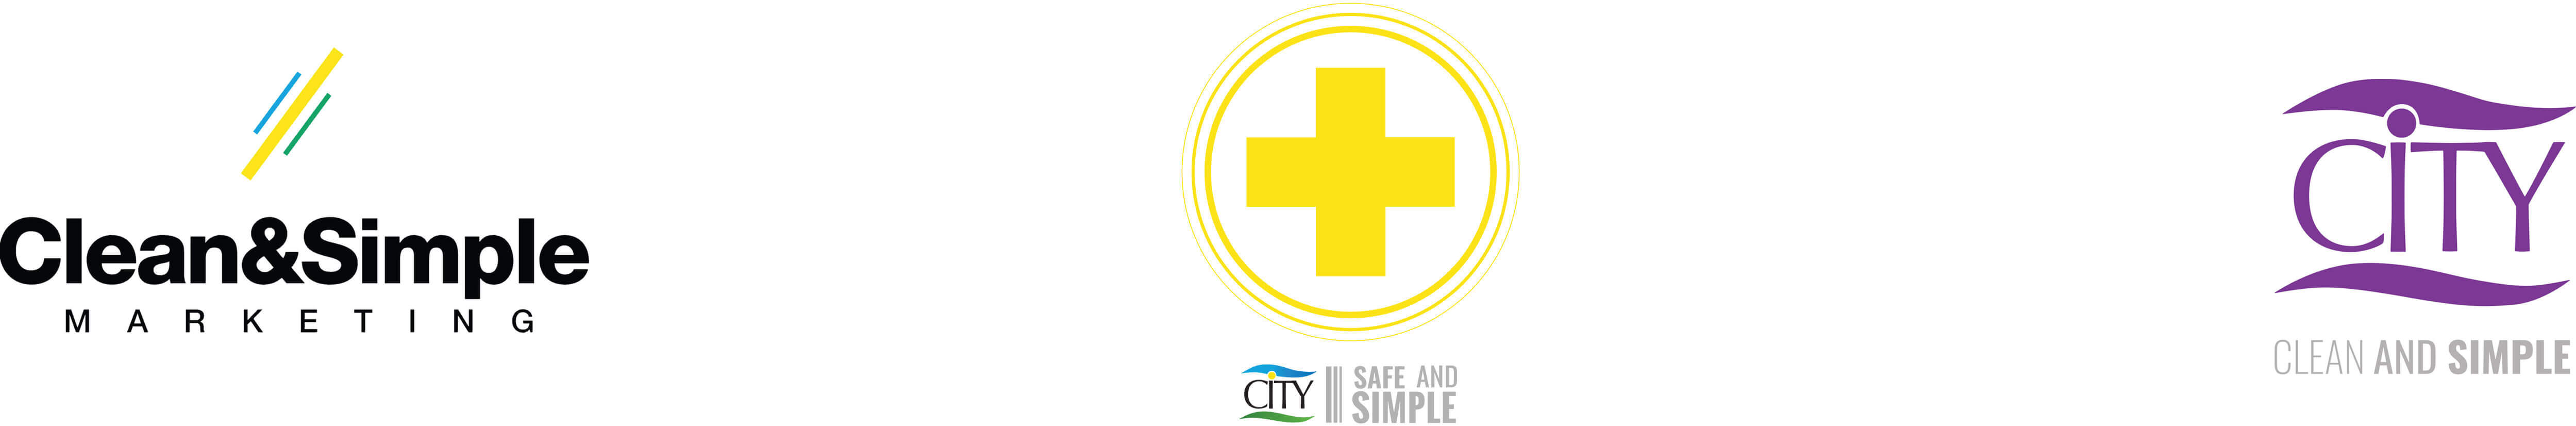 Clean & Simple Marketing, Safe & Simple and City Healthcare logos